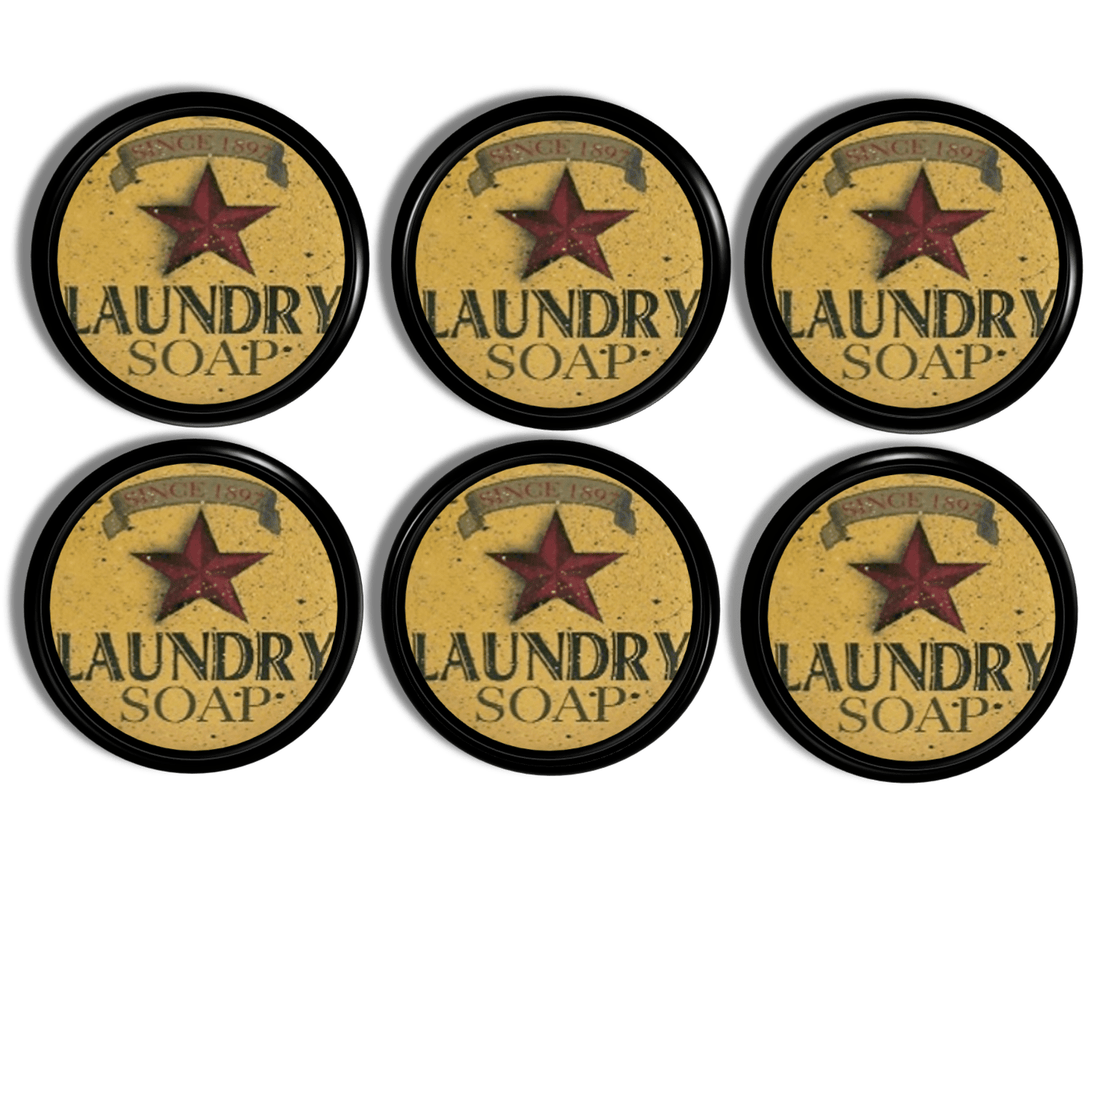 6 knobs with vintage laundry soap advertisement in muted gold and red colors. Antique primitive country farm style hardware.